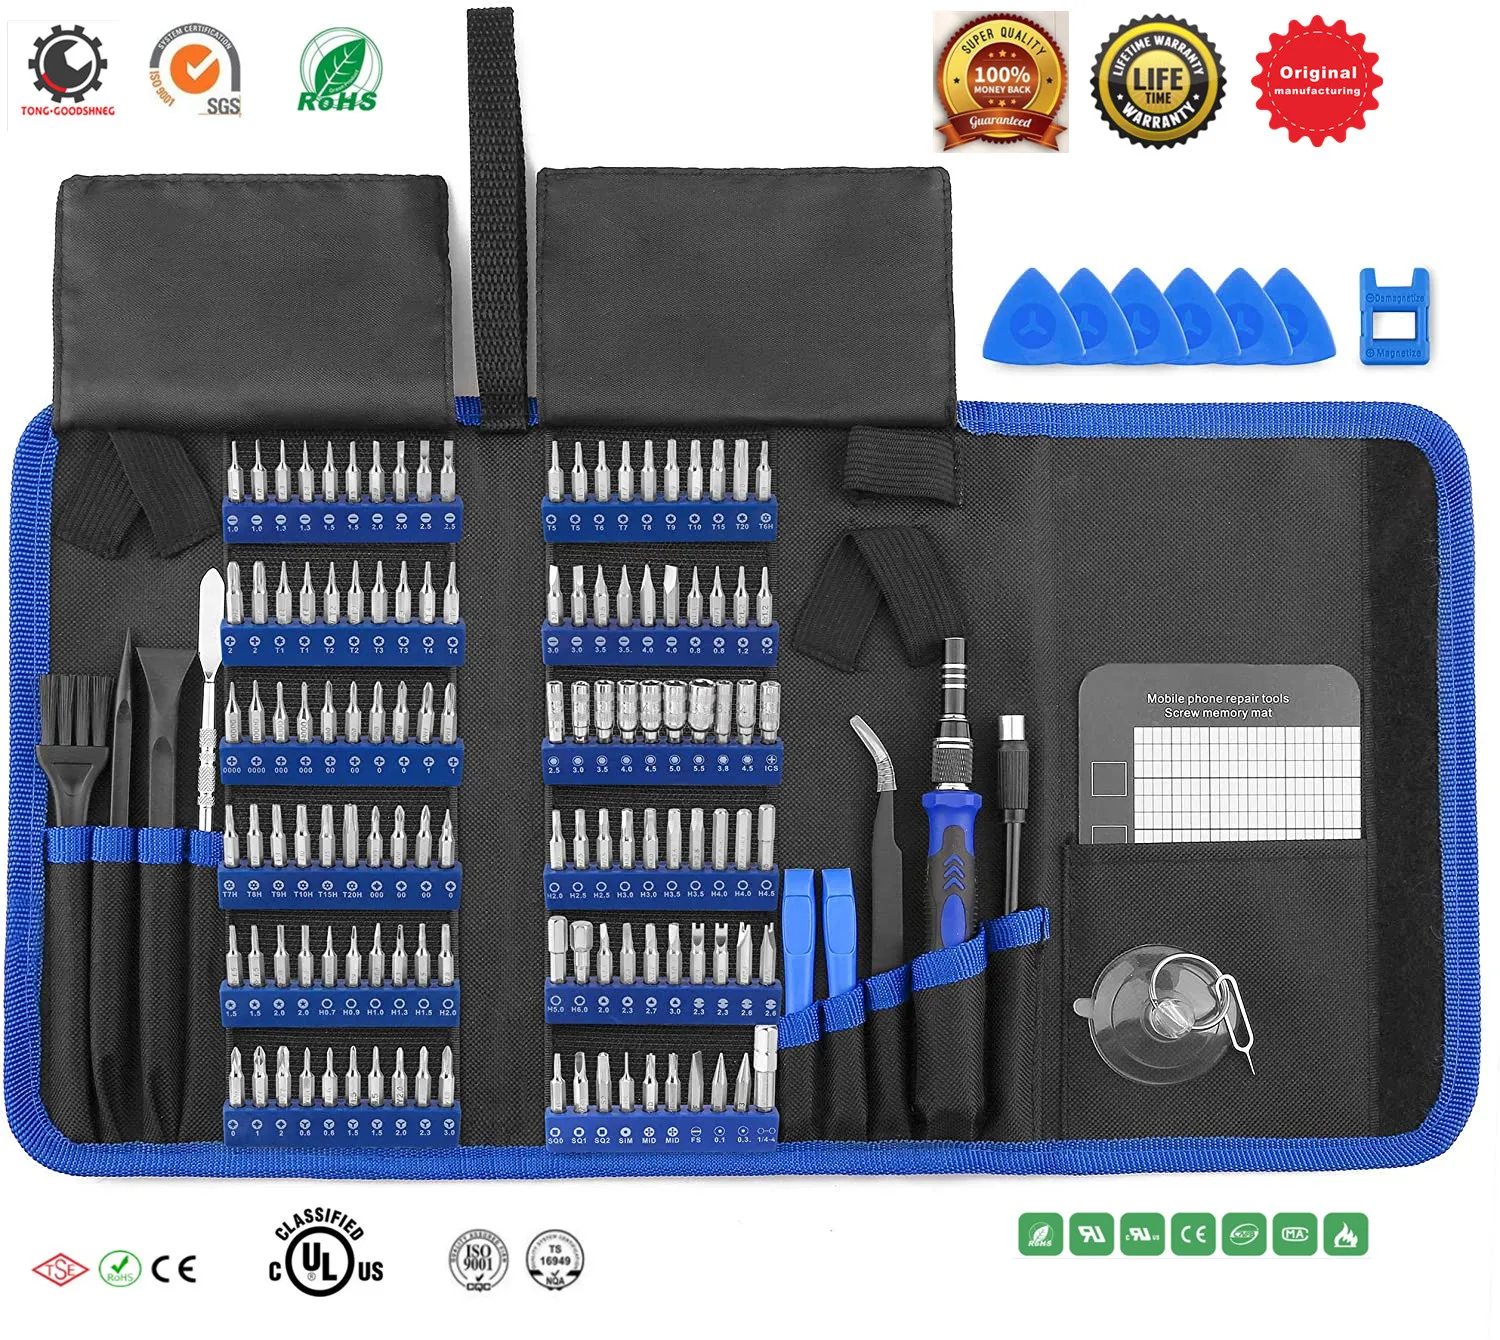 PC MacBook and Other Electronics Bovidix 190404101 Professional Electronics Repair Tool Set for iPhone Tablet 41 PC Precision Screwdriver Bit Set